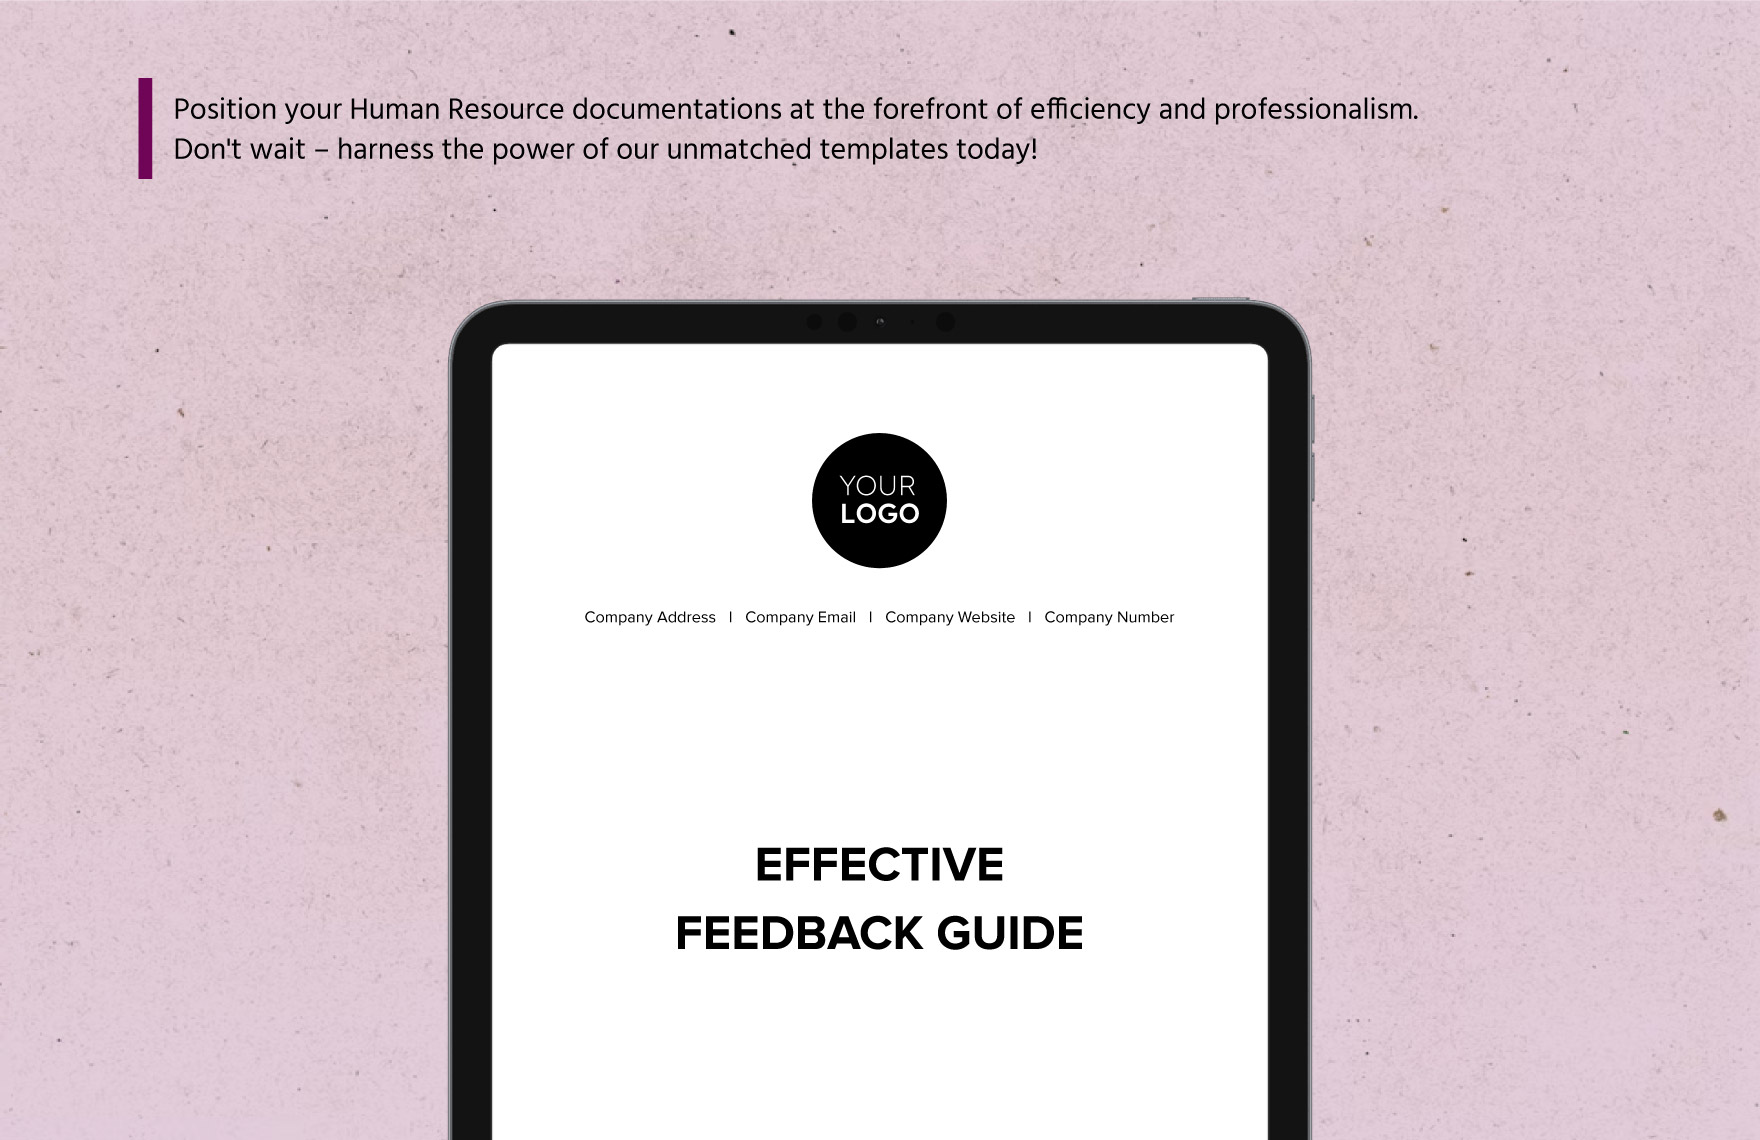 Effective Feedback Guide HR Template